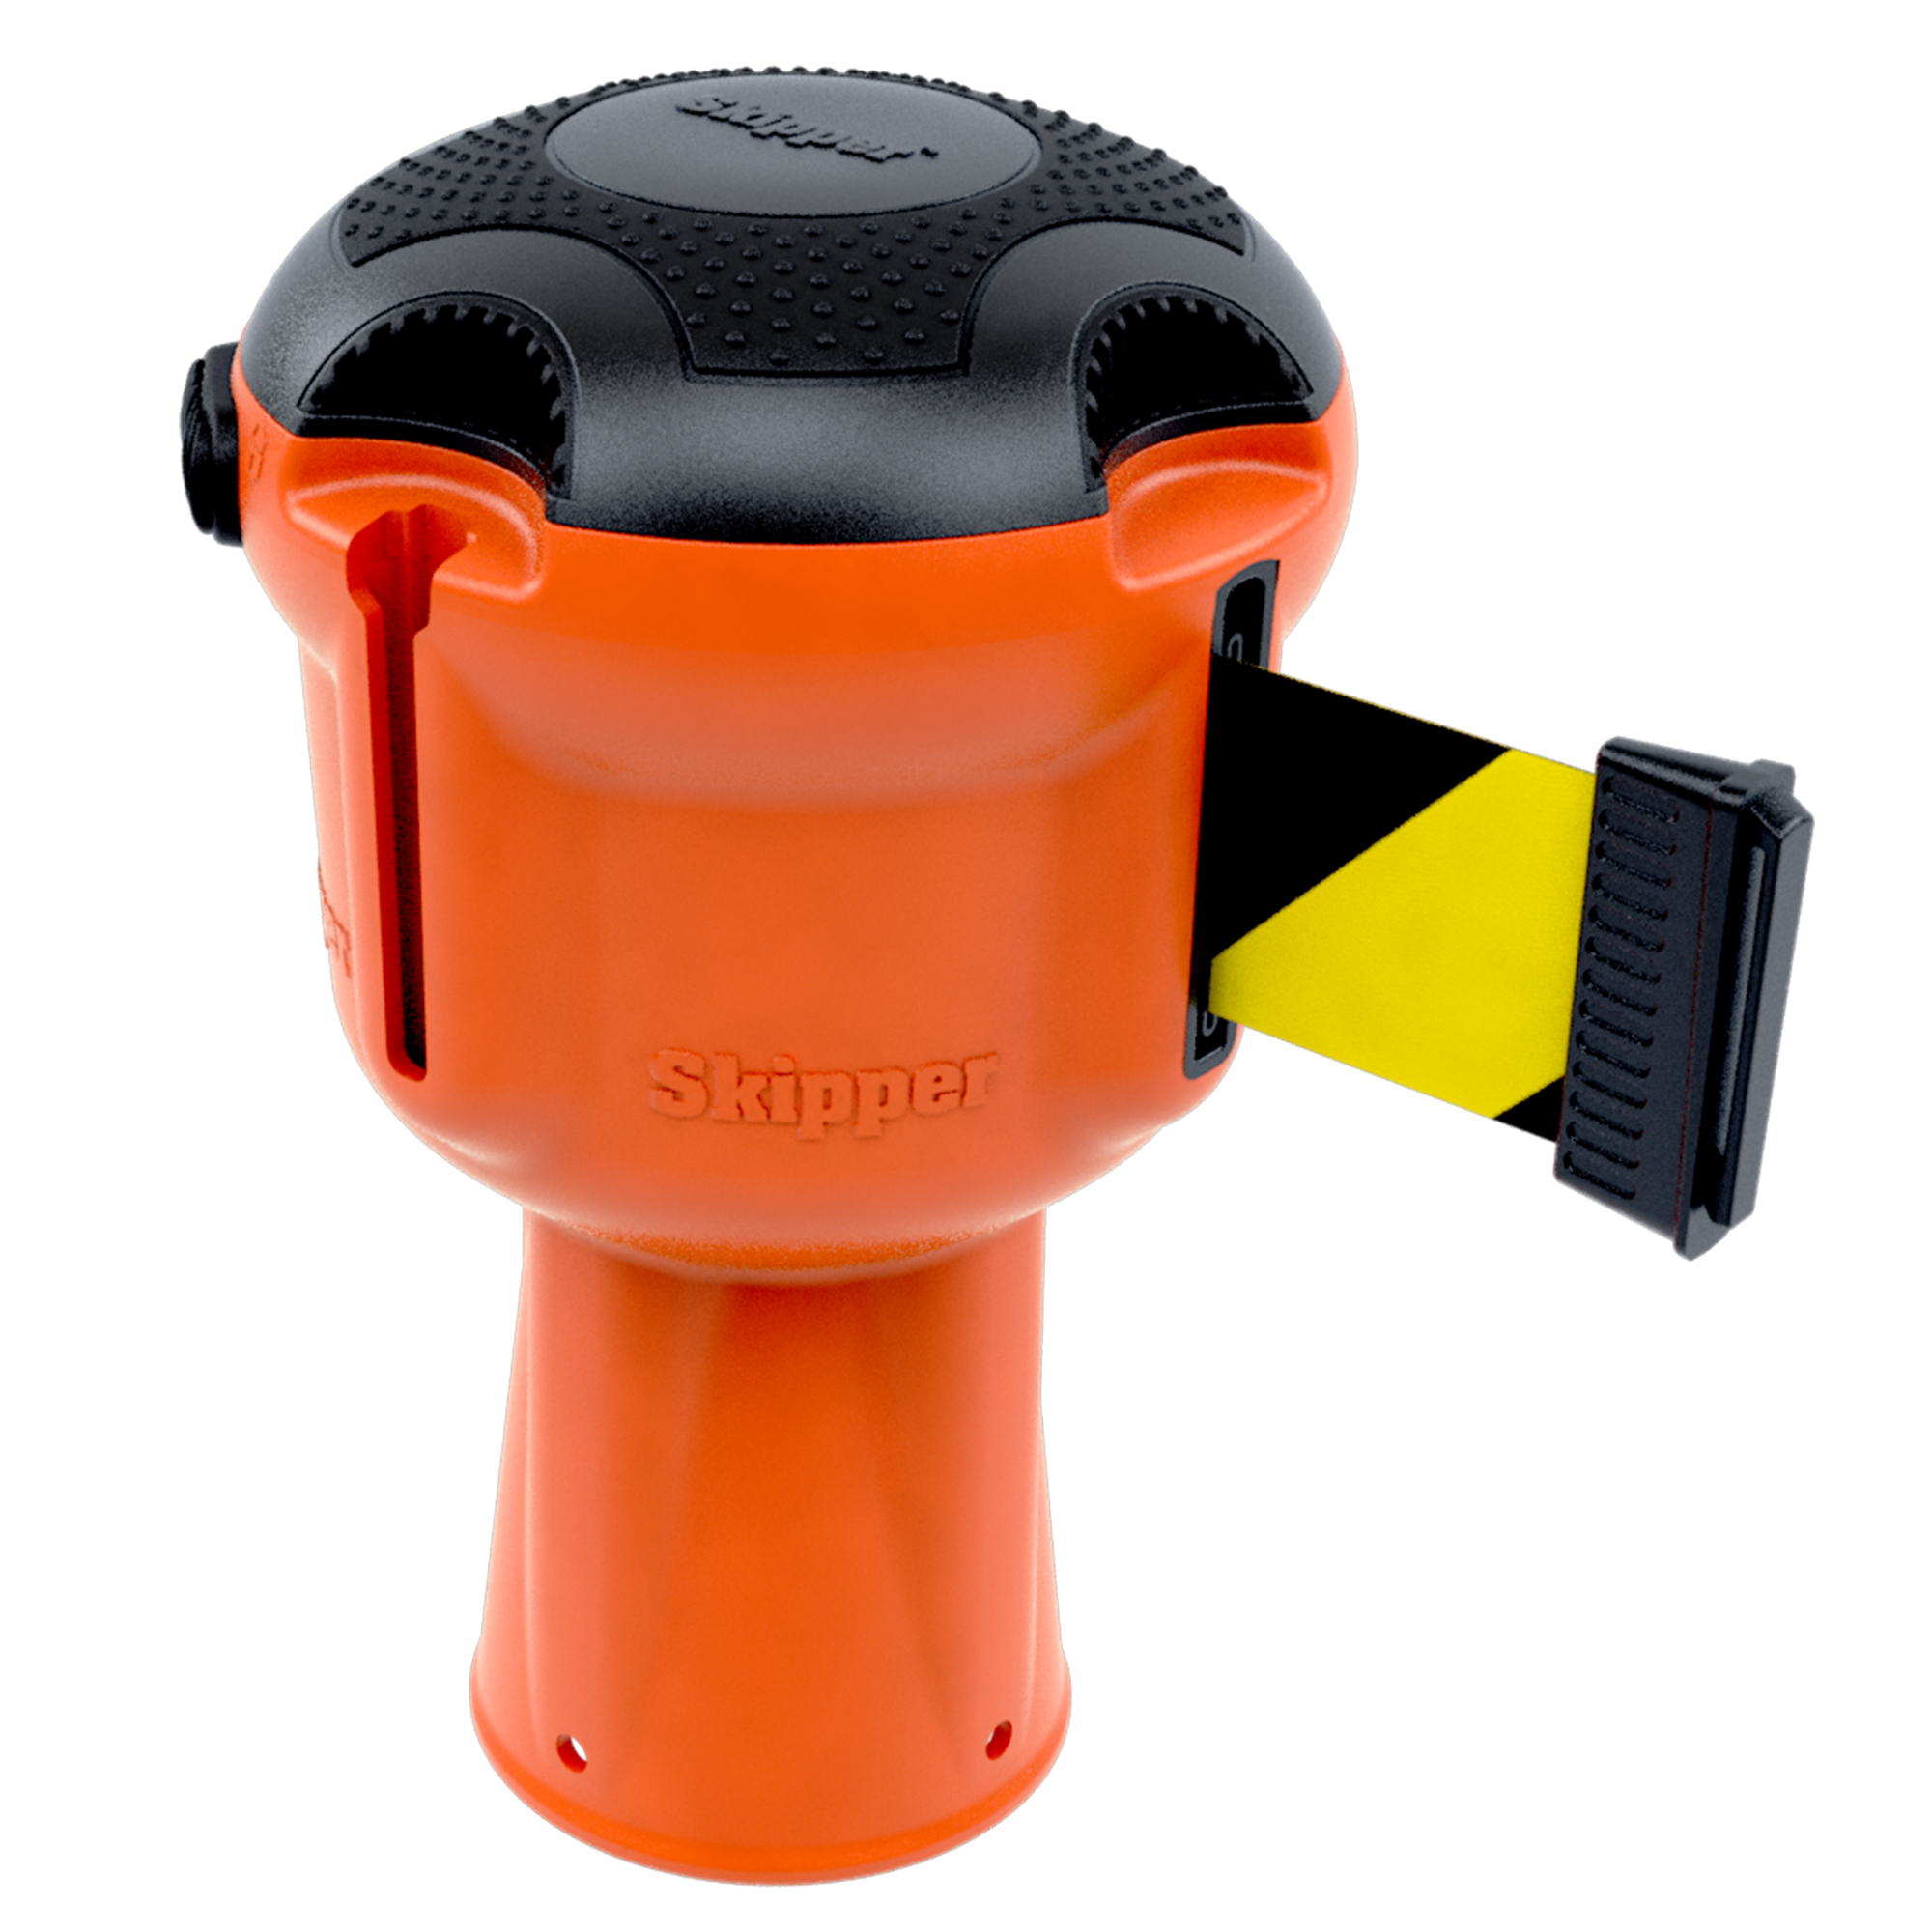 Skipper Retractable Unit For Barrier (Orange with black/yellow tape)